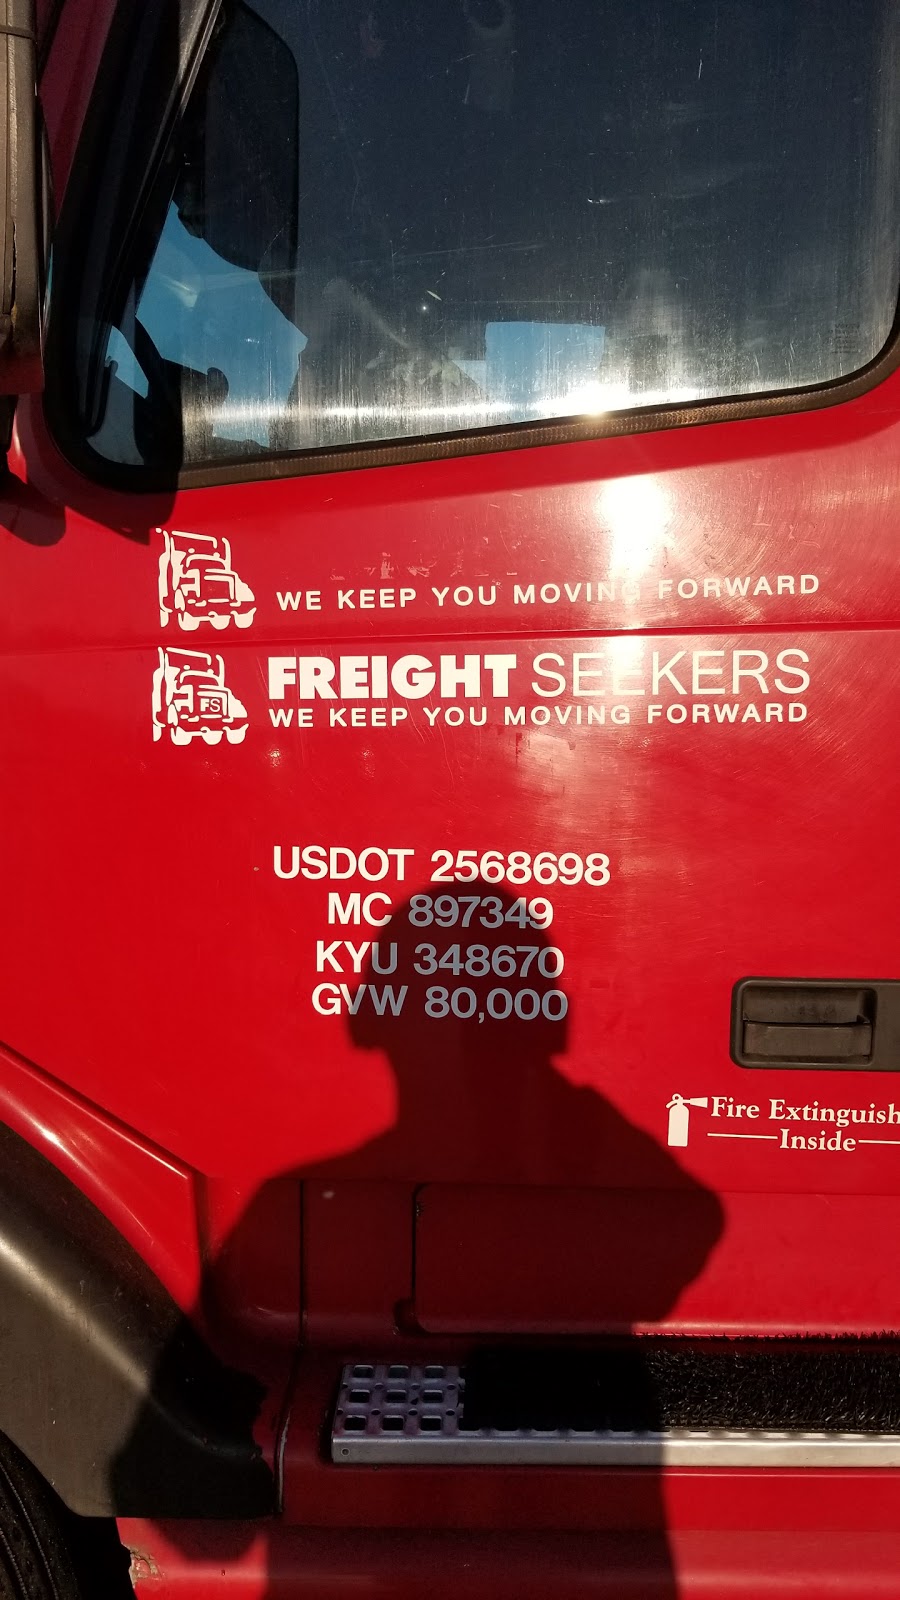 Freight Seekers | 318 Fillmore Ave, Plainfield, NJ 07060, USA | Phone: (866) 277-0303